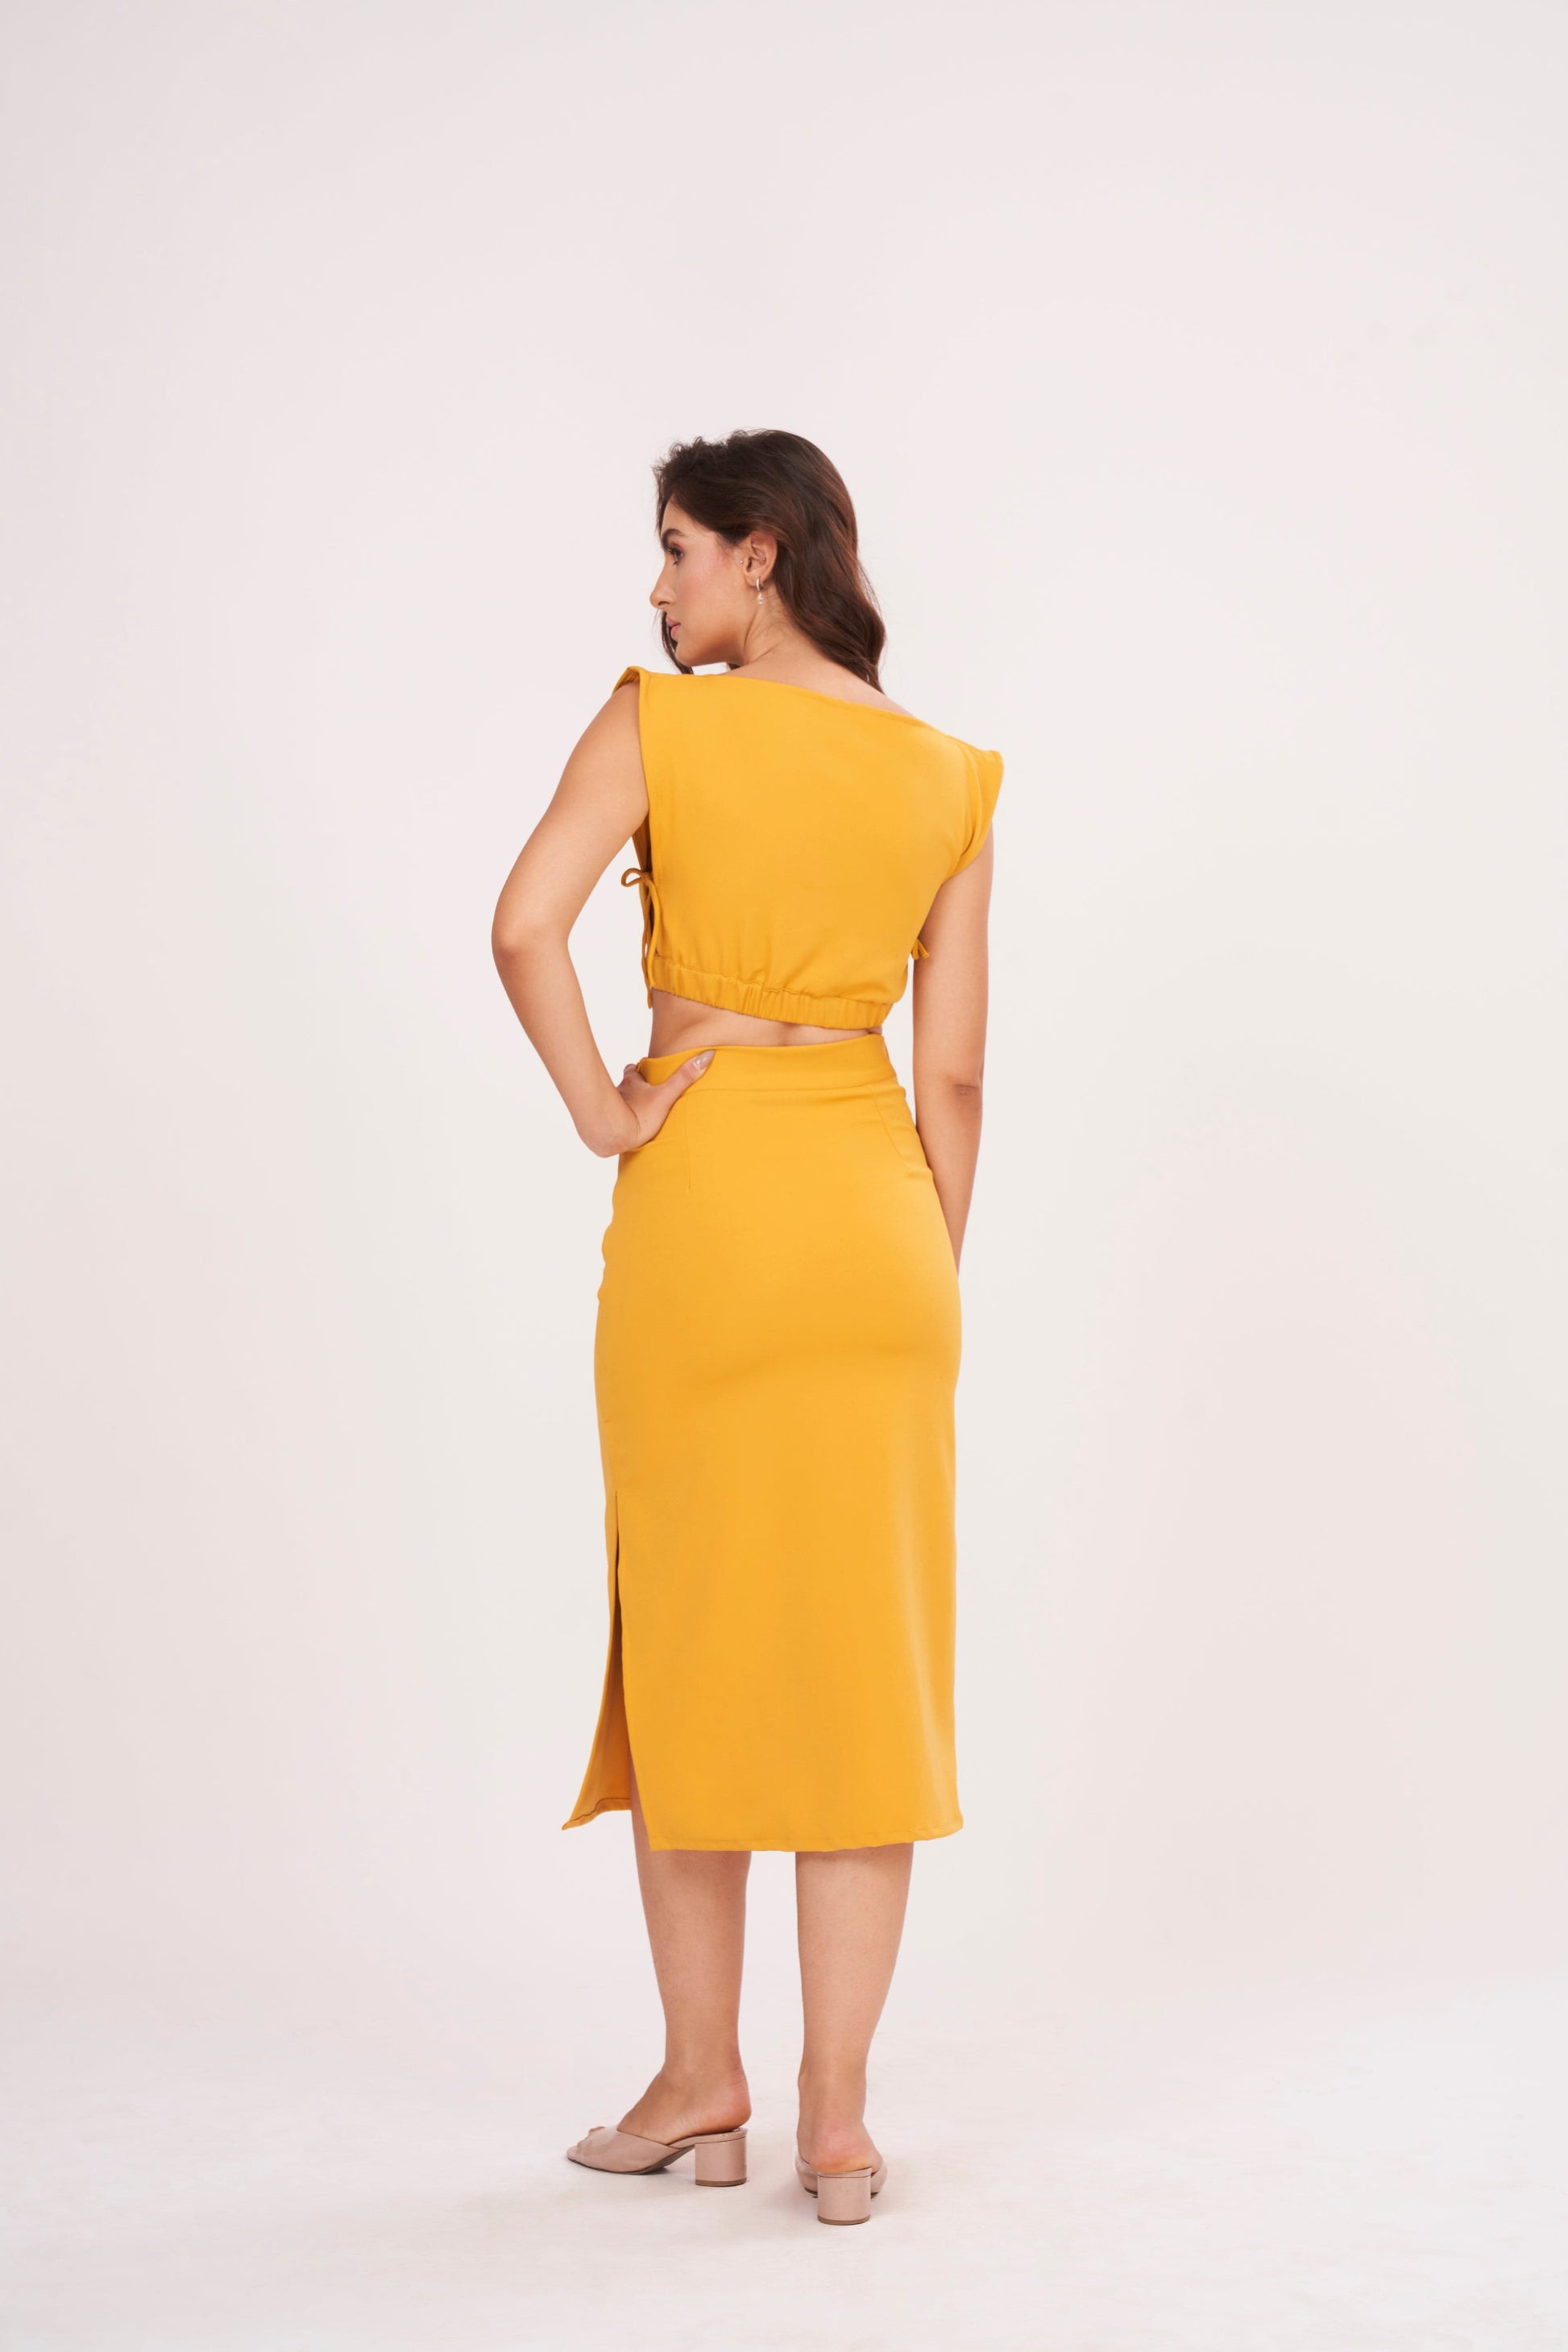 Mustard yellow long skirt with high-waisted design and side slit, made from high-quality muslin fabric. Side cut adds drama and allure. Suitable for dressing up or down.